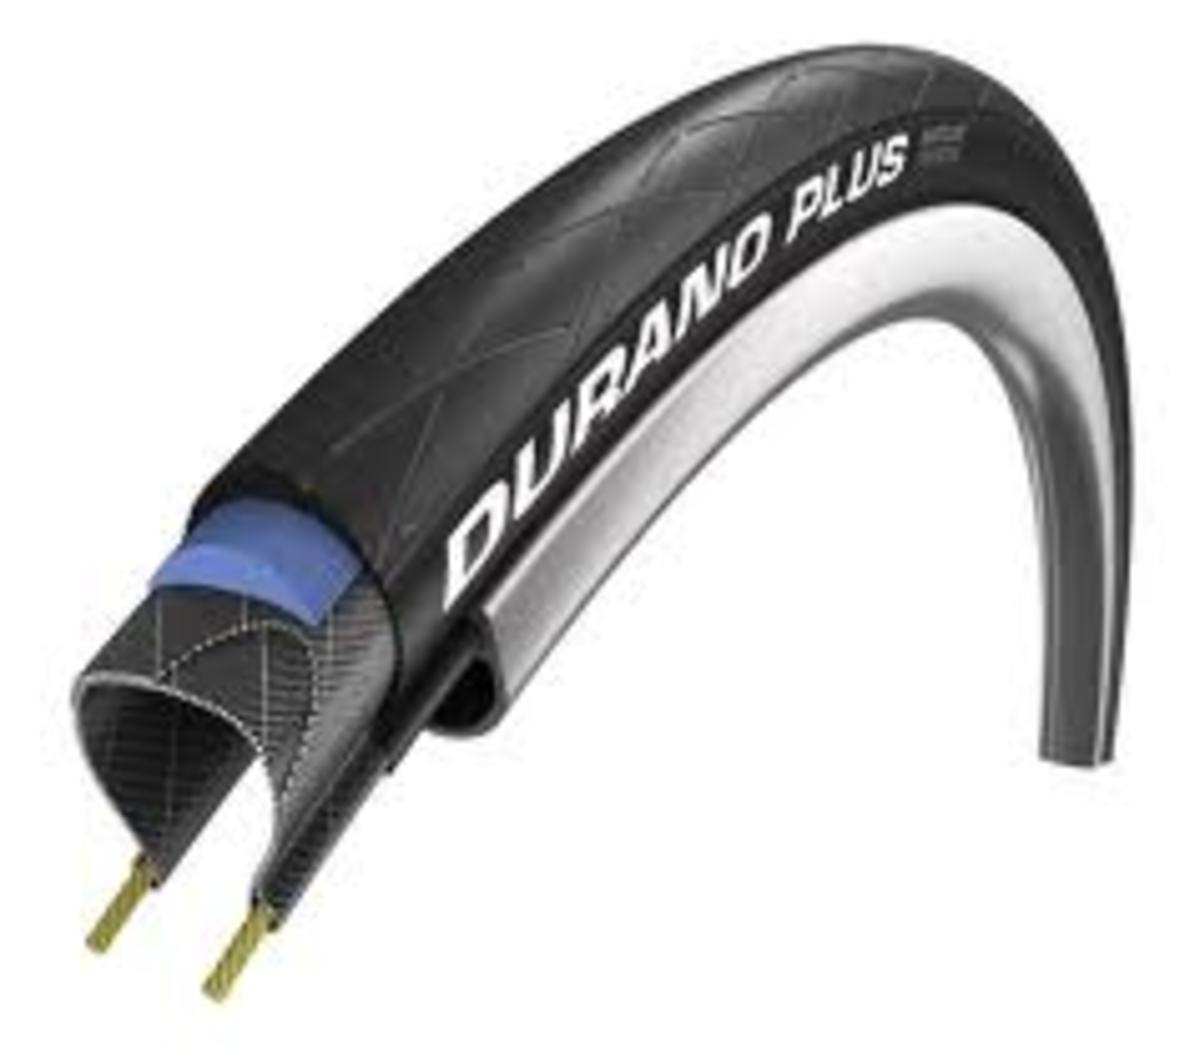 Schwalbe Durano Plus tyre for winter cycling